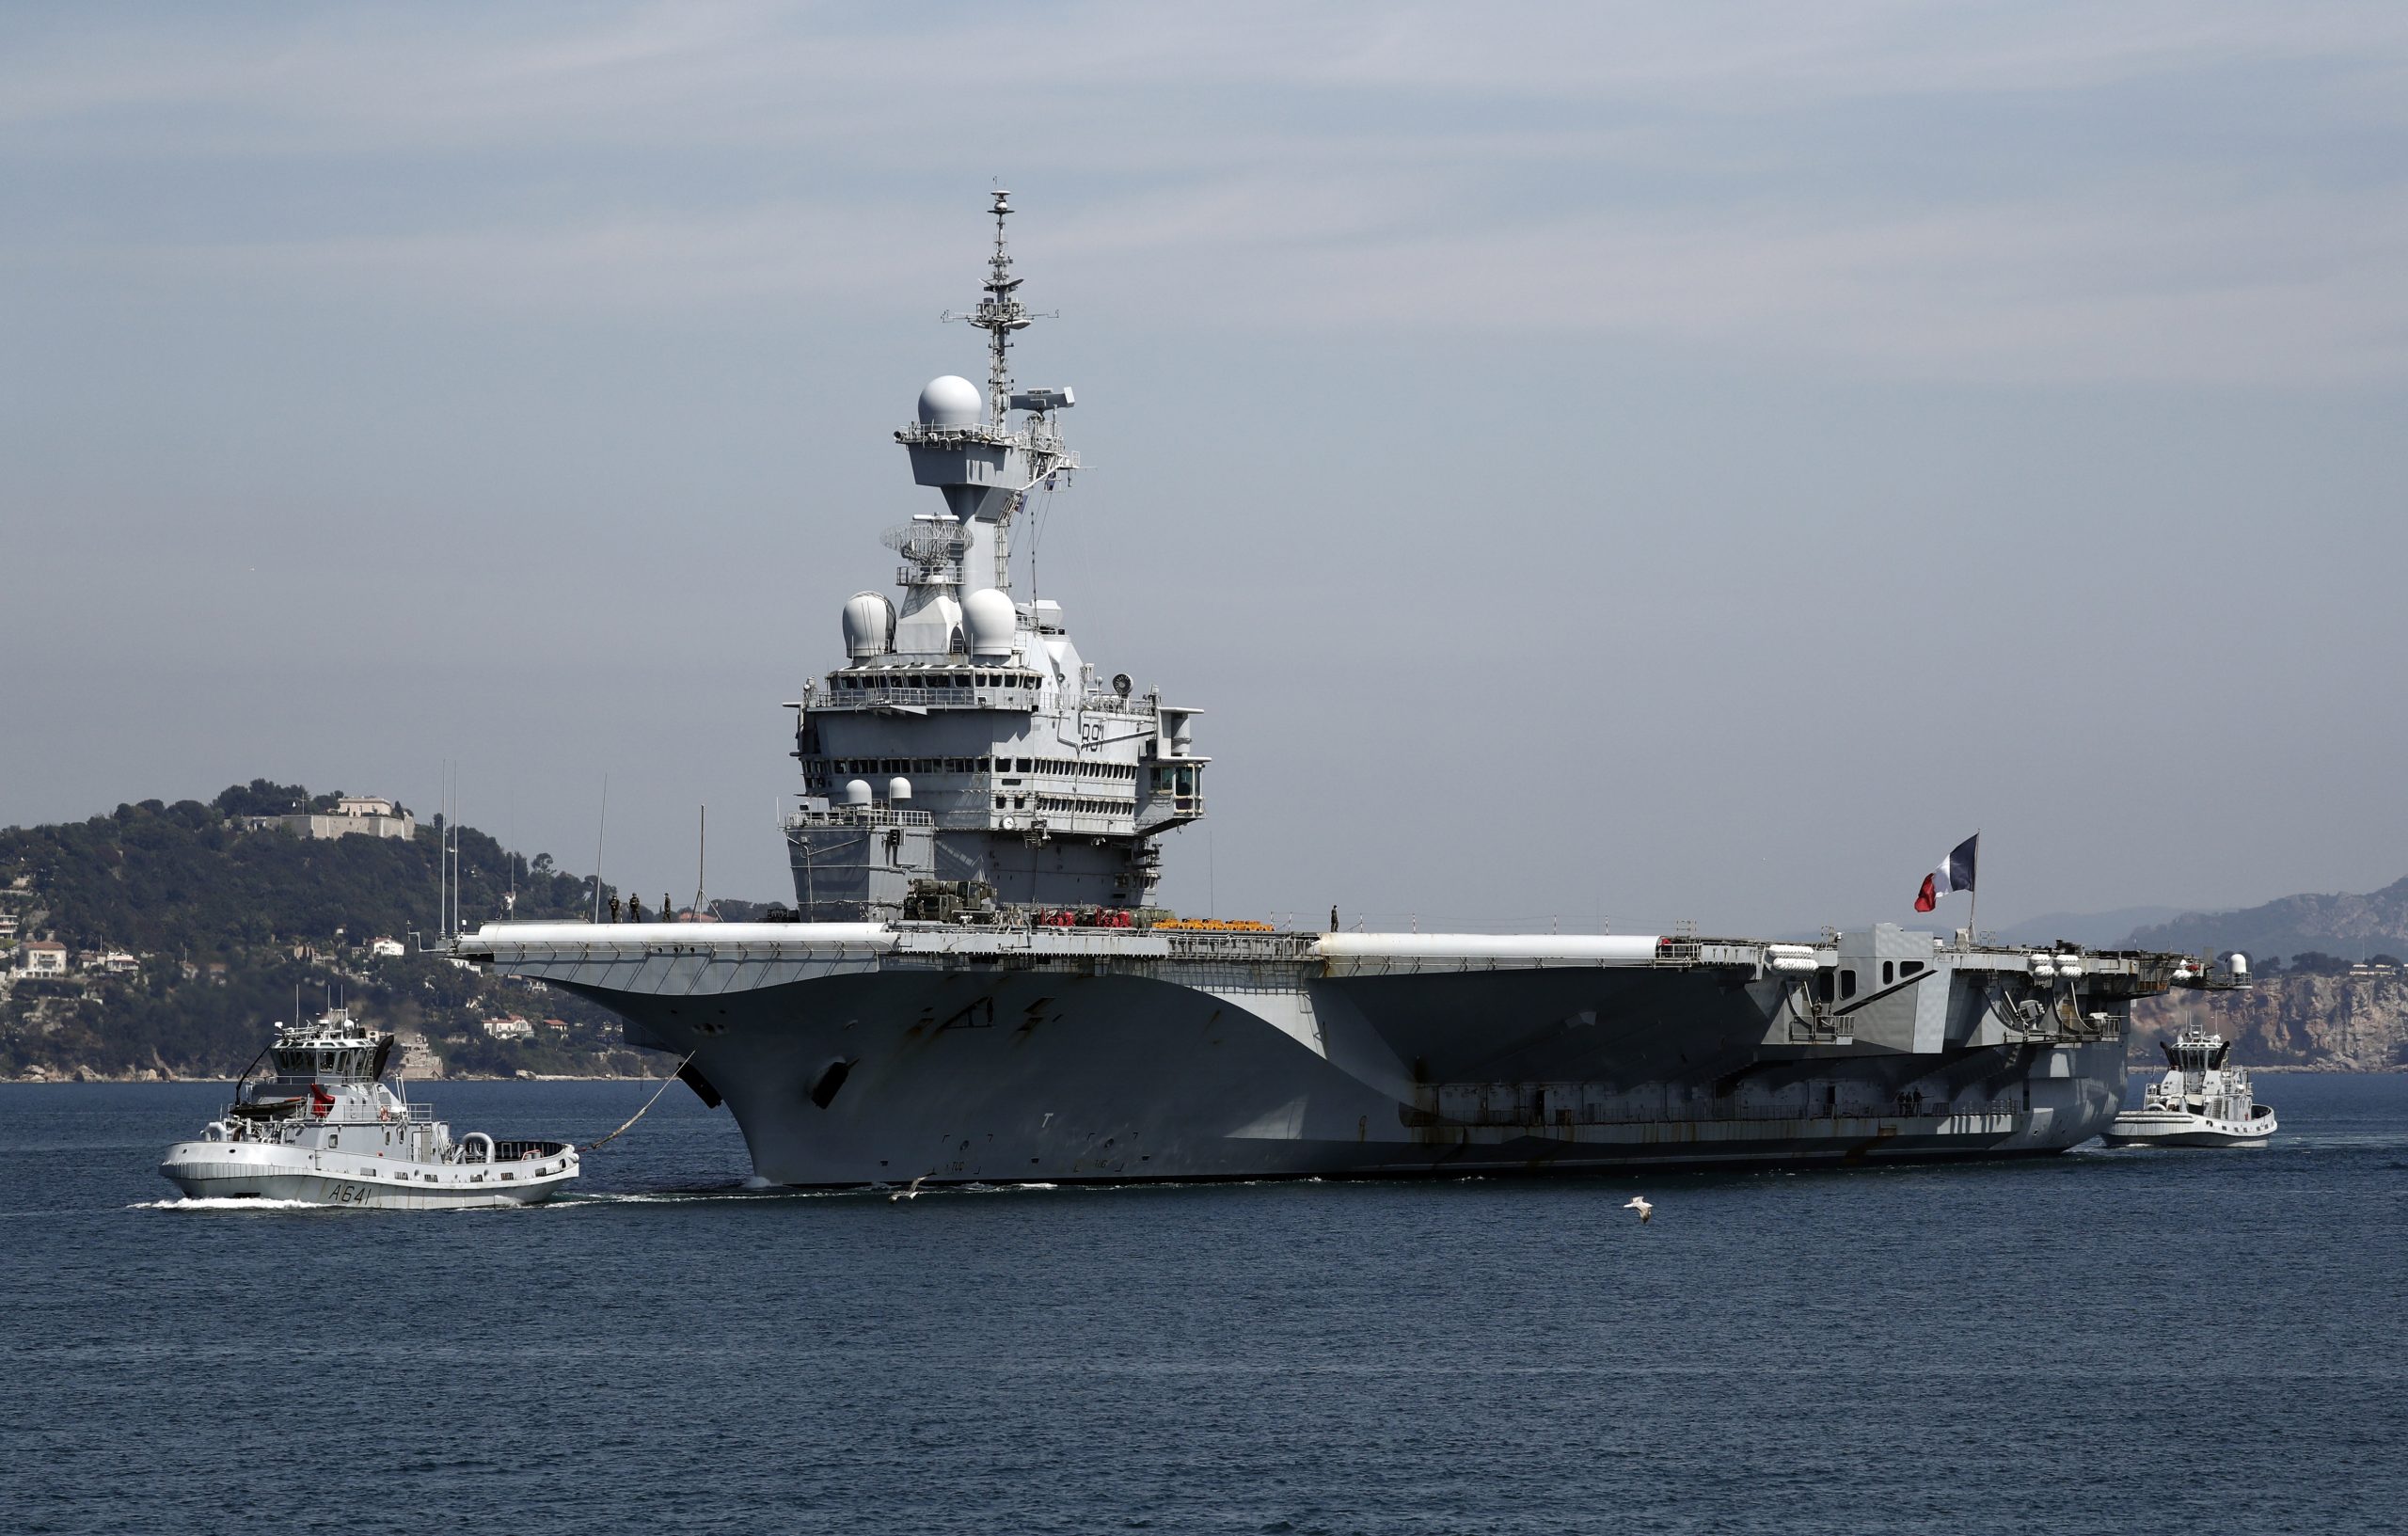 epa08358990 The French nuclear aircraft carrier Charles De Gaulle arrives back in Toulon military harbor, southern France, 12 April 2020. The aircraft carrier Charles De Gaulle which was deployed in the Atlantic as part of the Foch mission returned to Toulon after around 50 crew members on board showed symptoms of the SARS-CoV-2 coronavirus causing the Covid-19 disease.  EPA/GUILLAUME HORCAJUELO